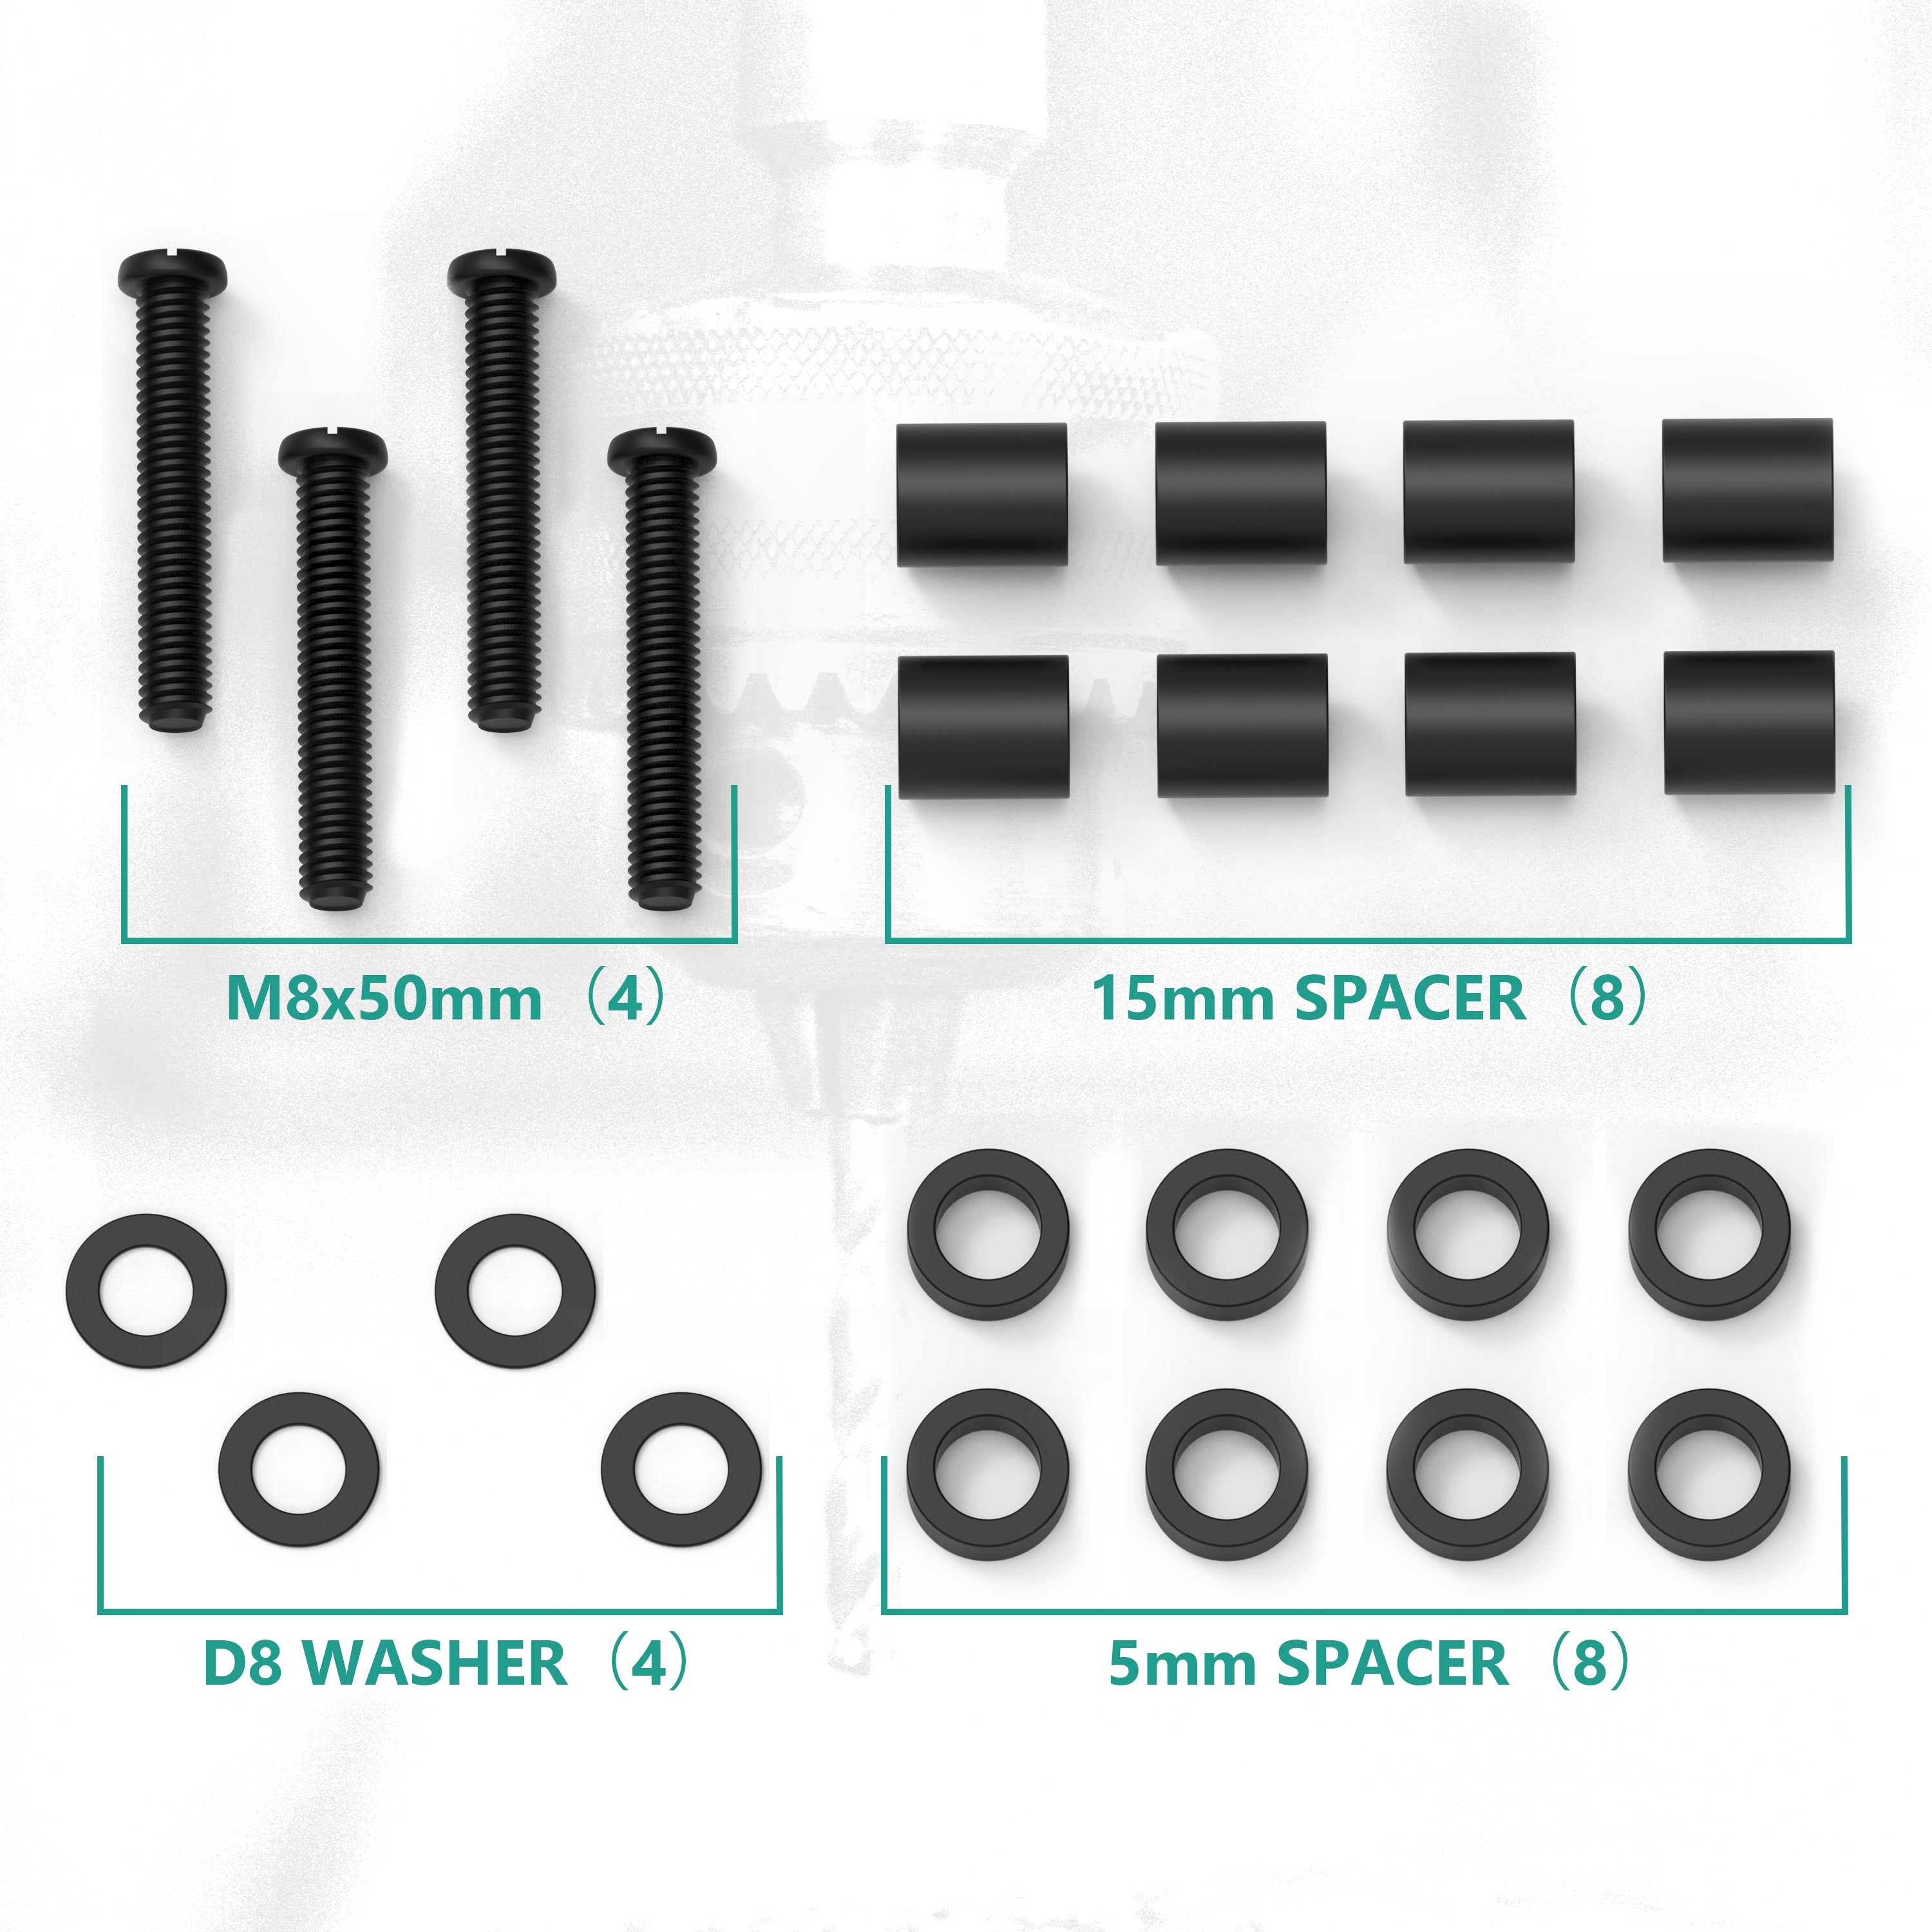 TV Stand Screws for Samsung, M8 TV Mounting Screws UVSSP-B ELECTRIC